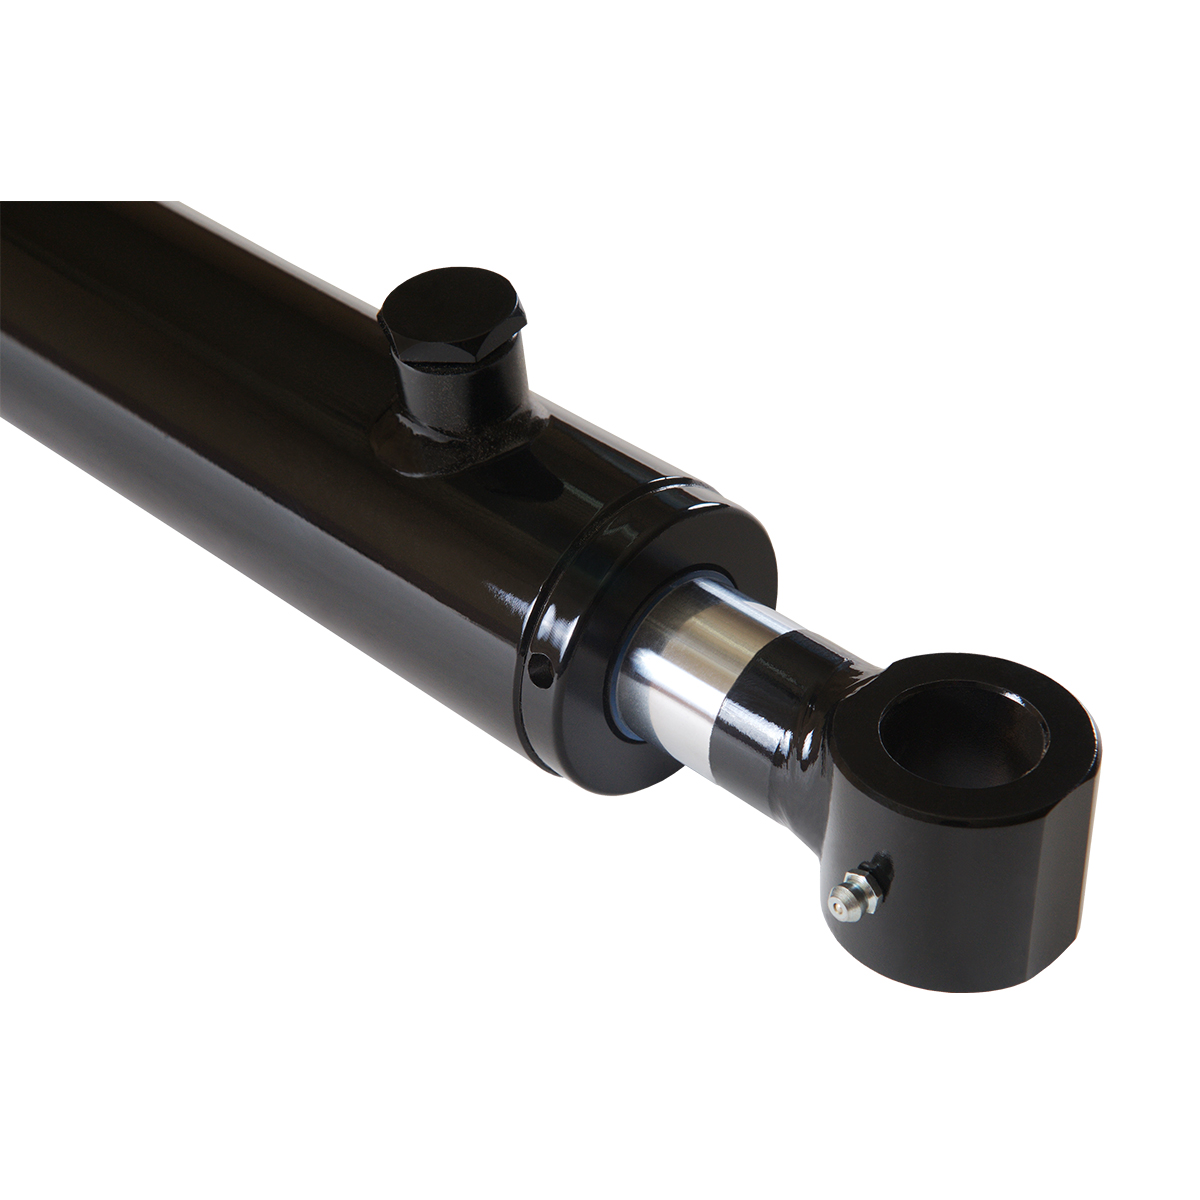 1.5 bore x 20 stroke hydraulic cylinder, welded tang double acting cylinder | Magister Hydraulics